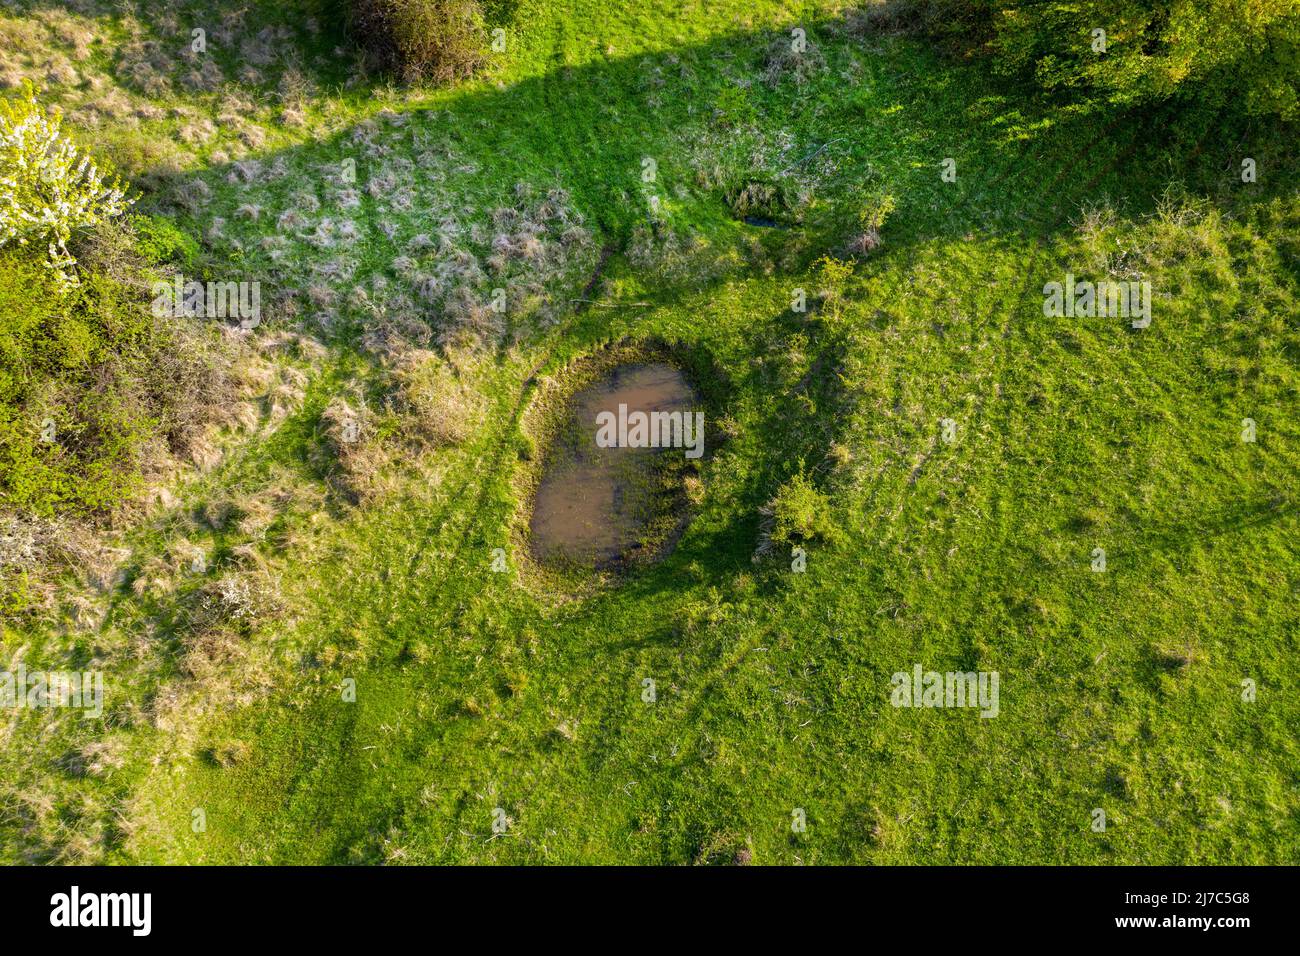 Aerial view of green pasture with small natural drinking ponds for buffalos and farm animals. Transylvania, Romania Stock Photo